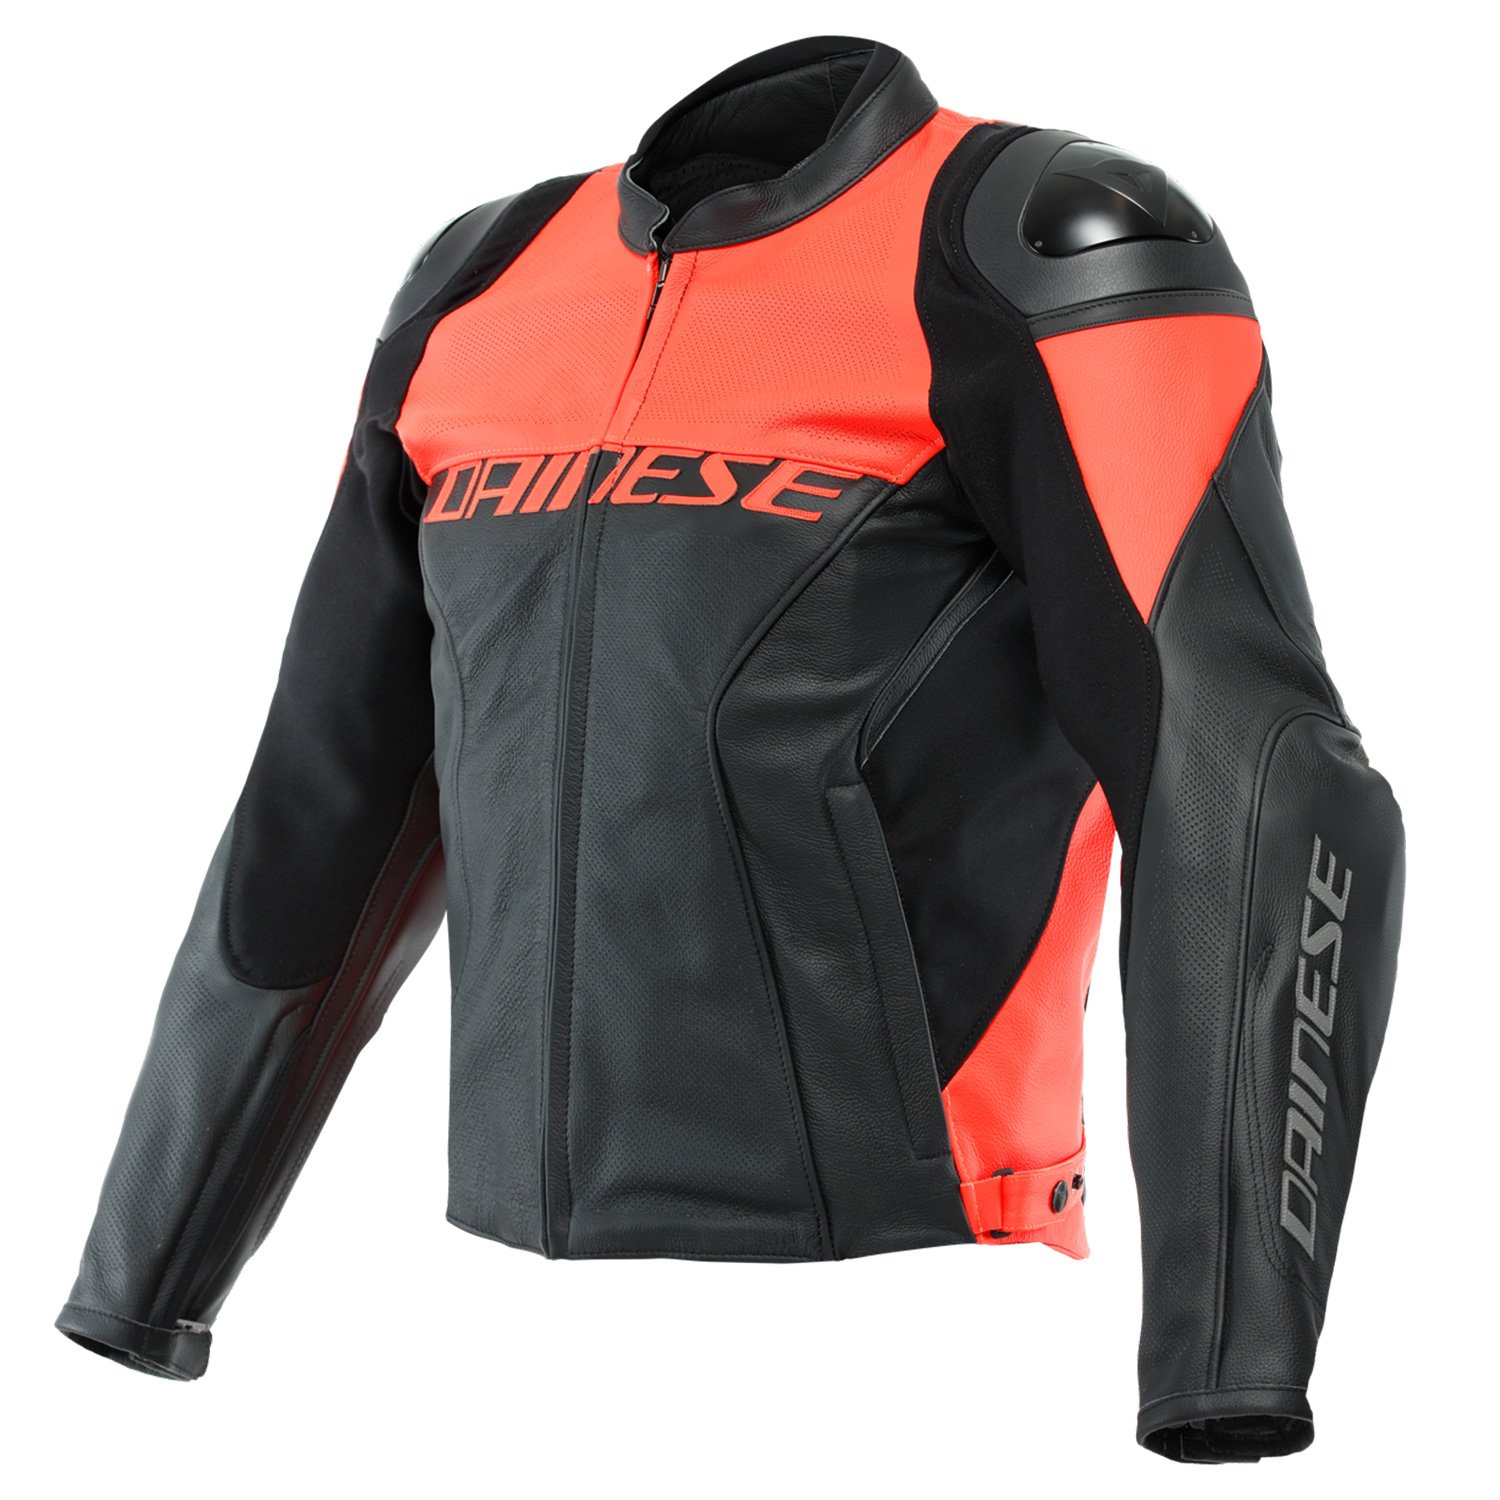 Image of Dainese Racing 4 Perforated Leather Schwarz Fluo Rot Jacke Größe 64